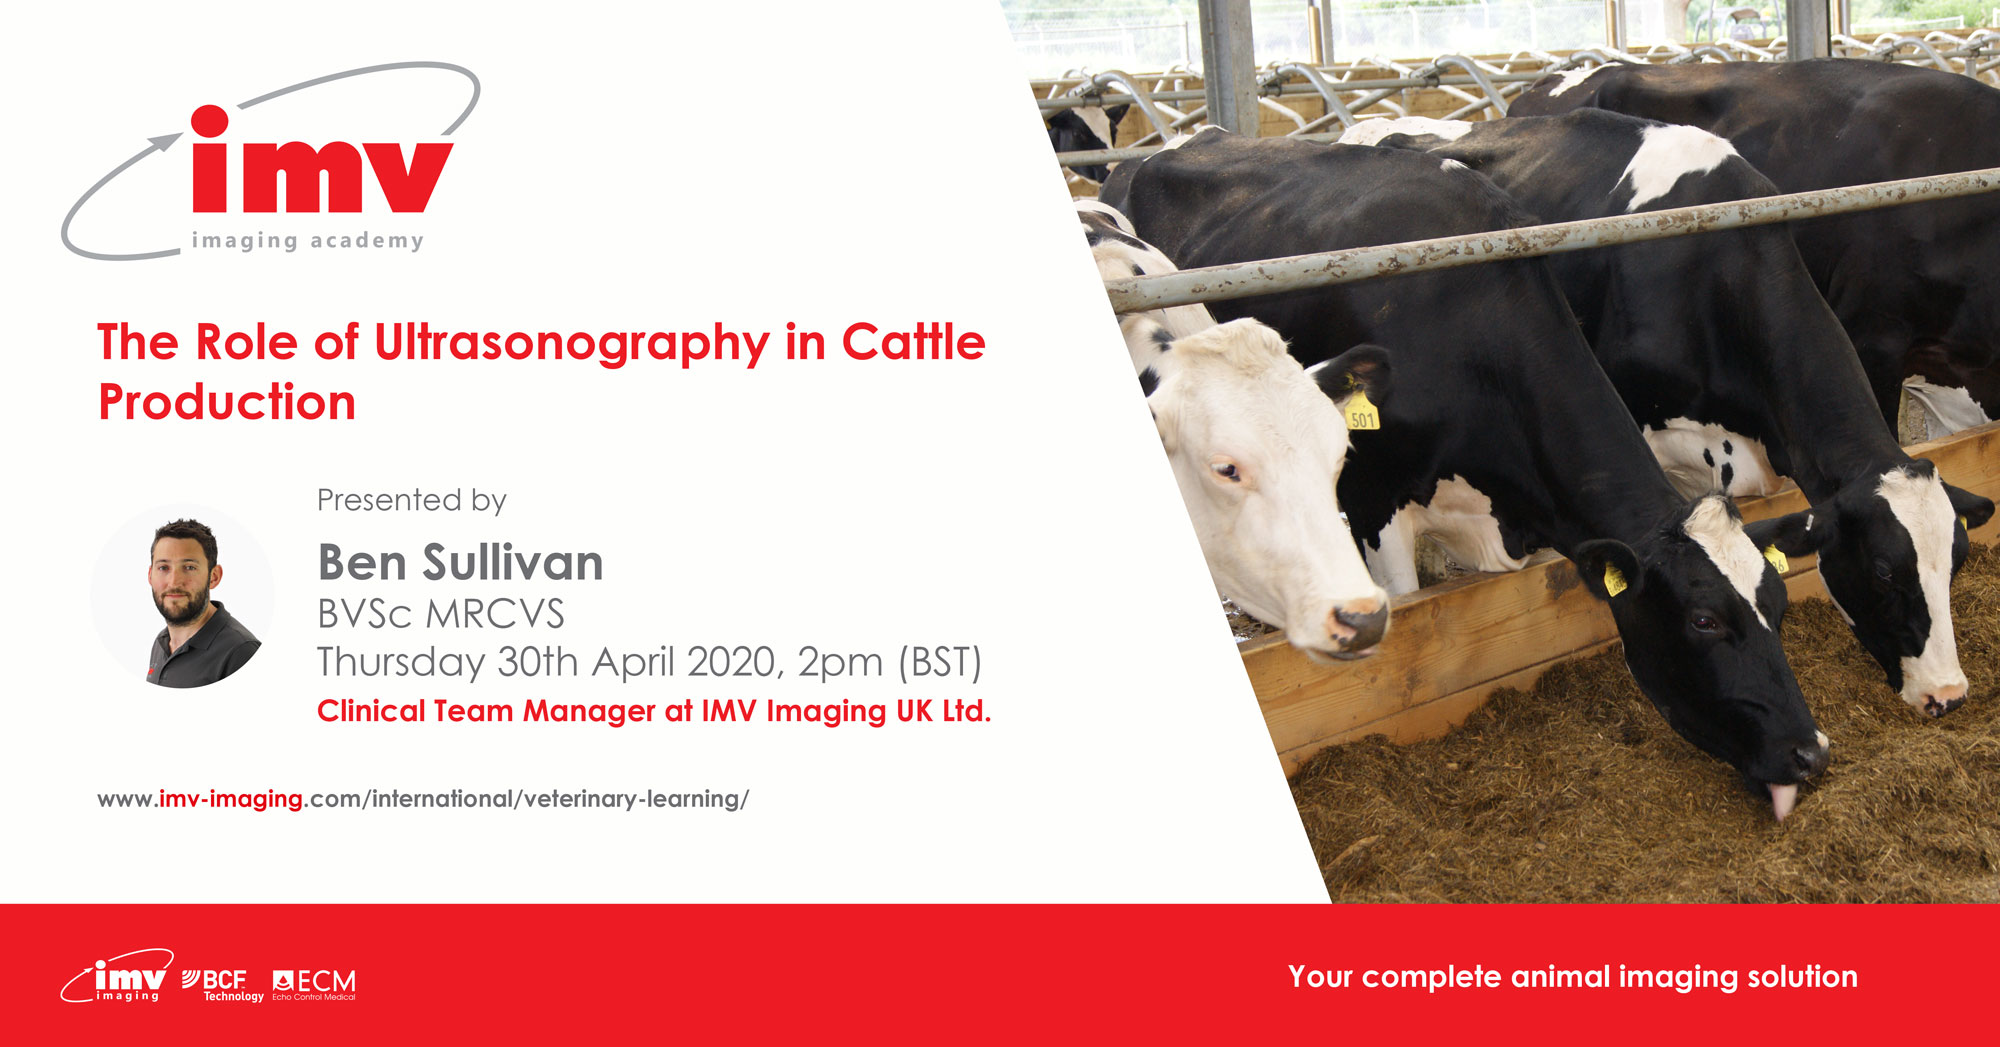 The Role of Ultrasonography in Cattle Production